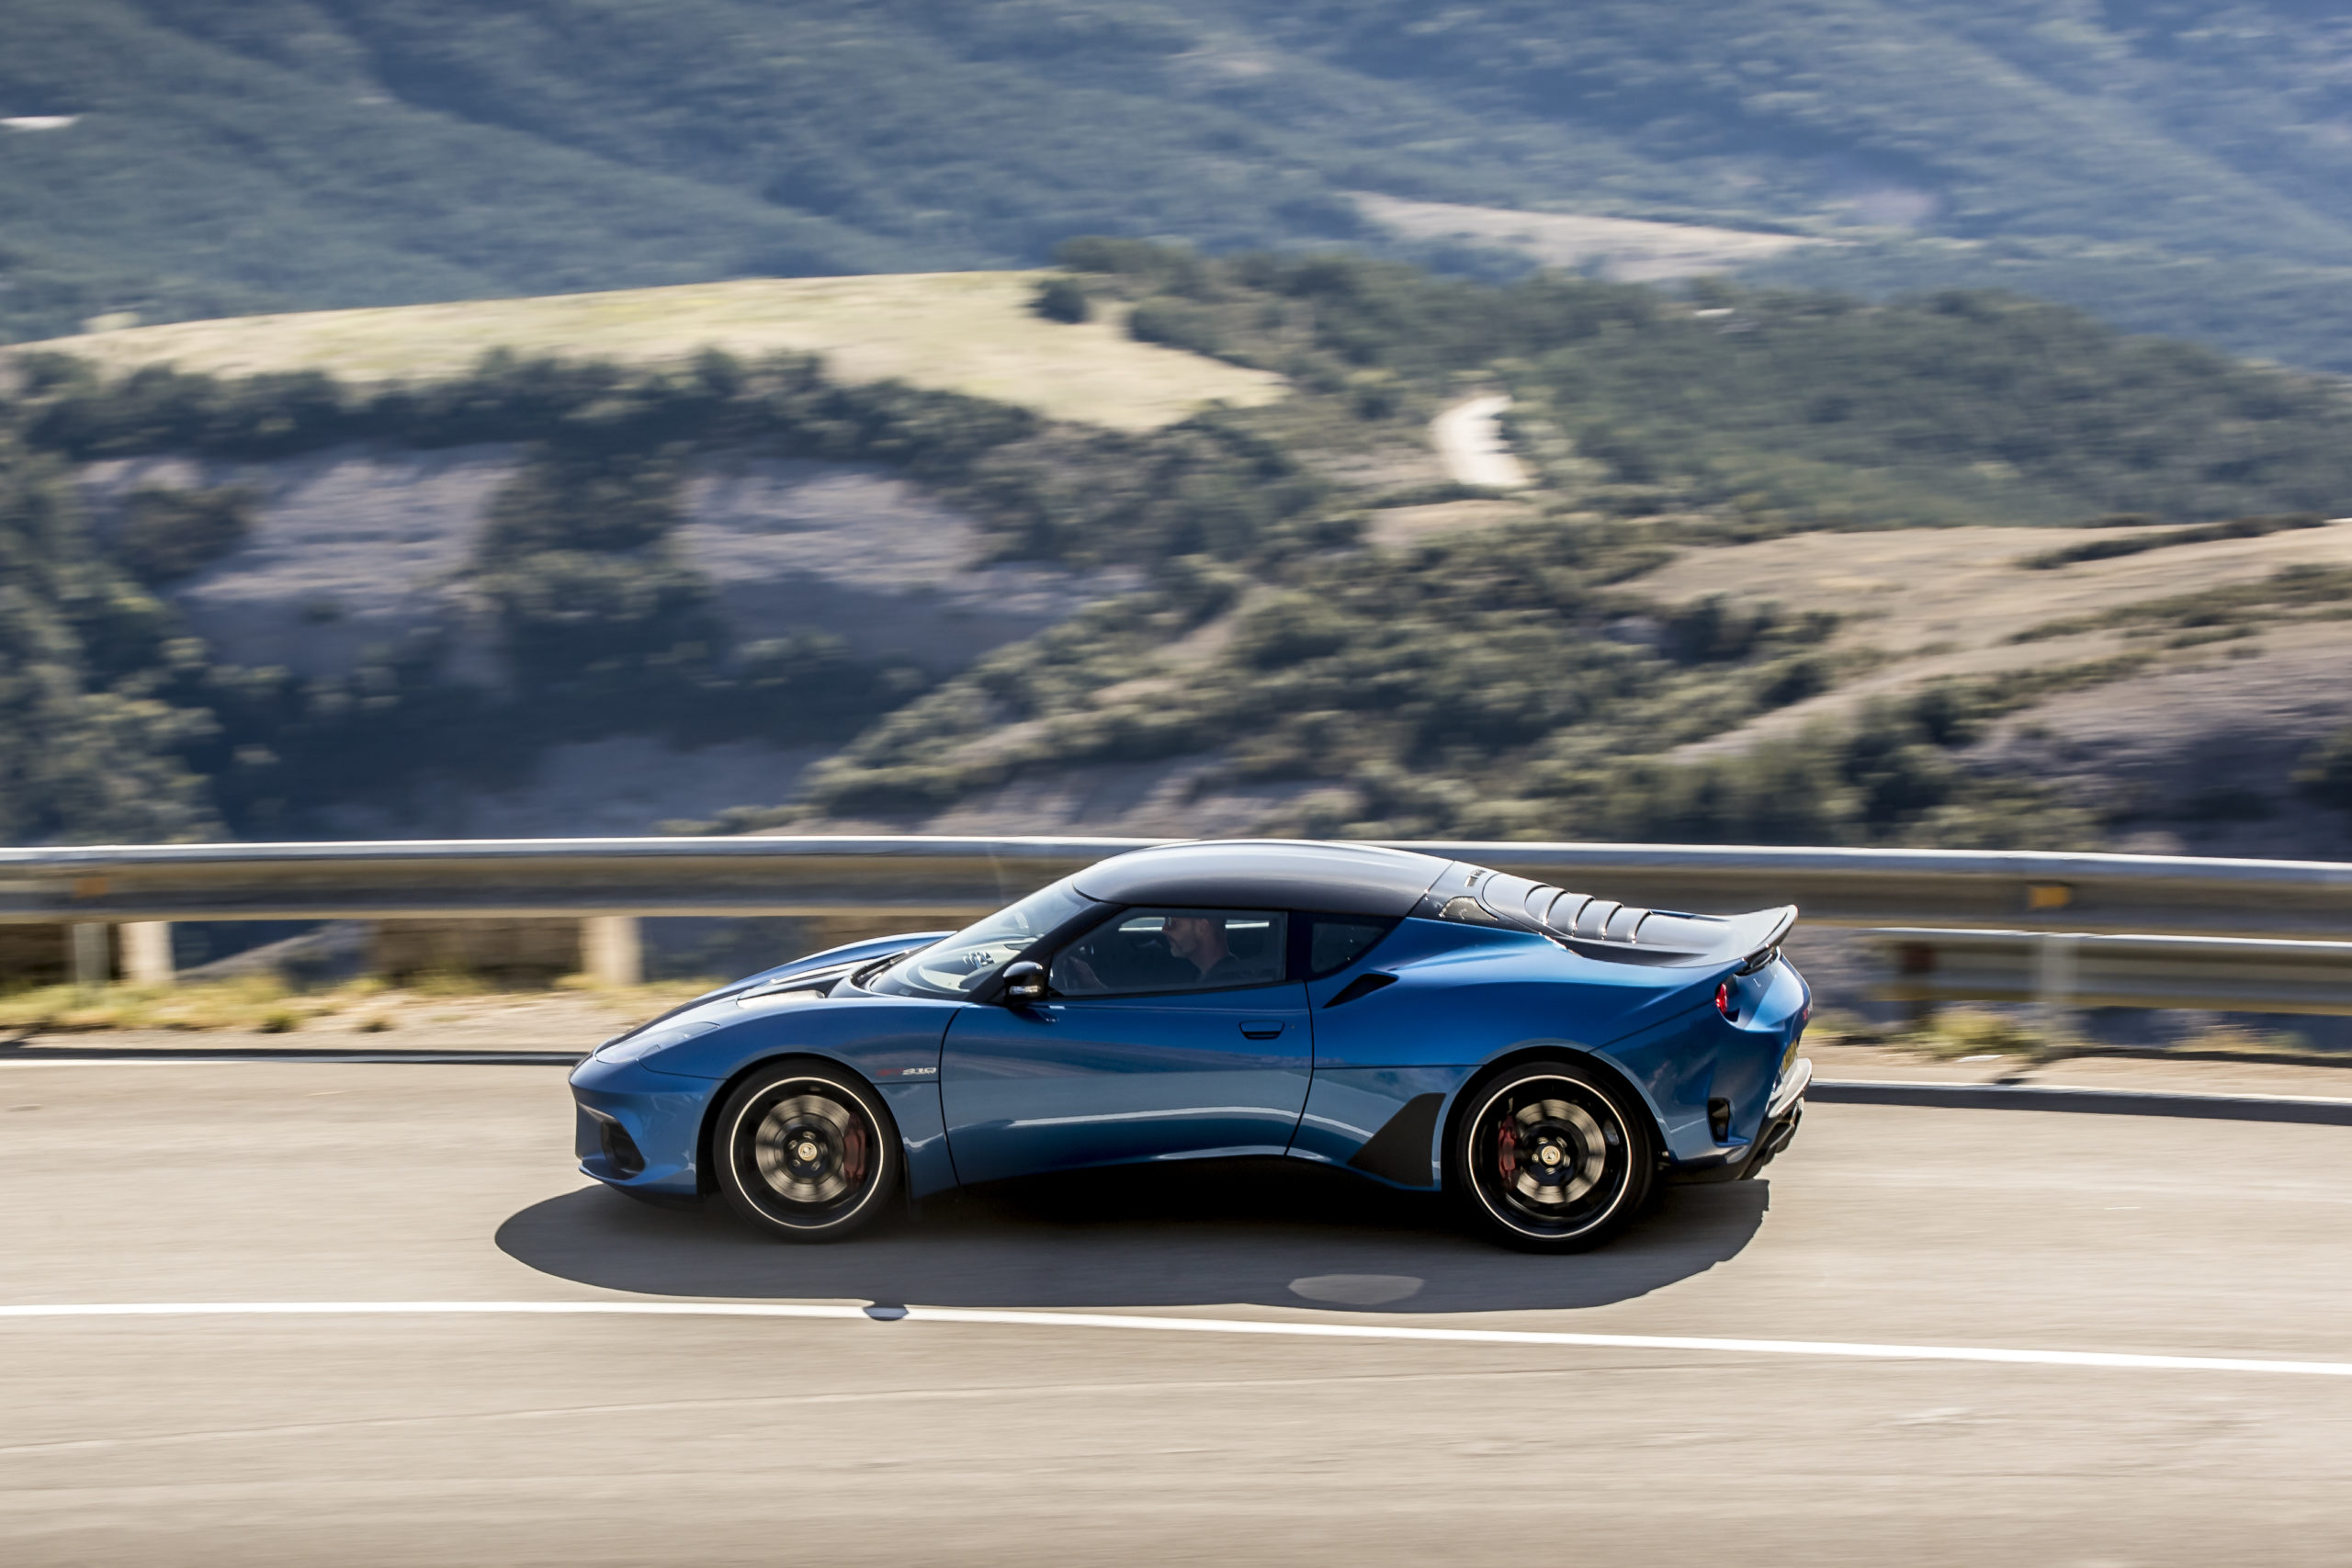 Lotus: one last ICE sports car before full EV transition